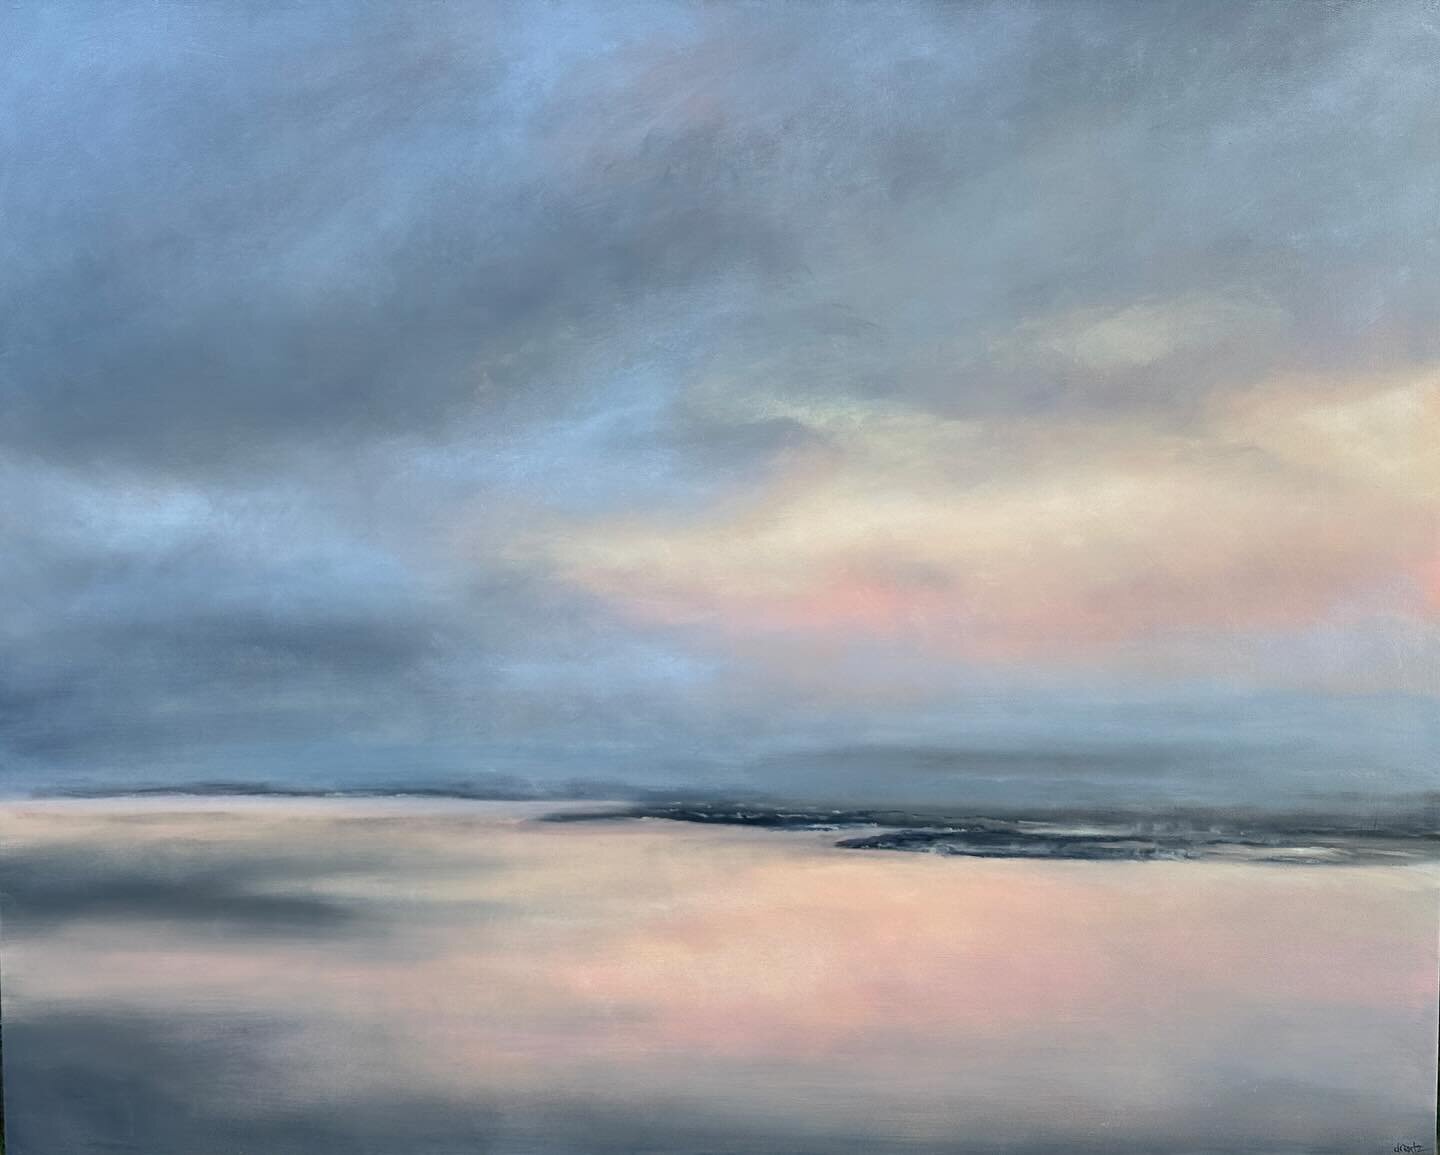 This one was fun! The pink and yellow light of this sky breaking through over the water makes me happy. &ldquo;Fond Farewell&rdquo;, 50x40, oil on panel 

#dawnrentz #cloudscape #skyscape #waterscape horizons #interiordecor #artforinteriors #interior